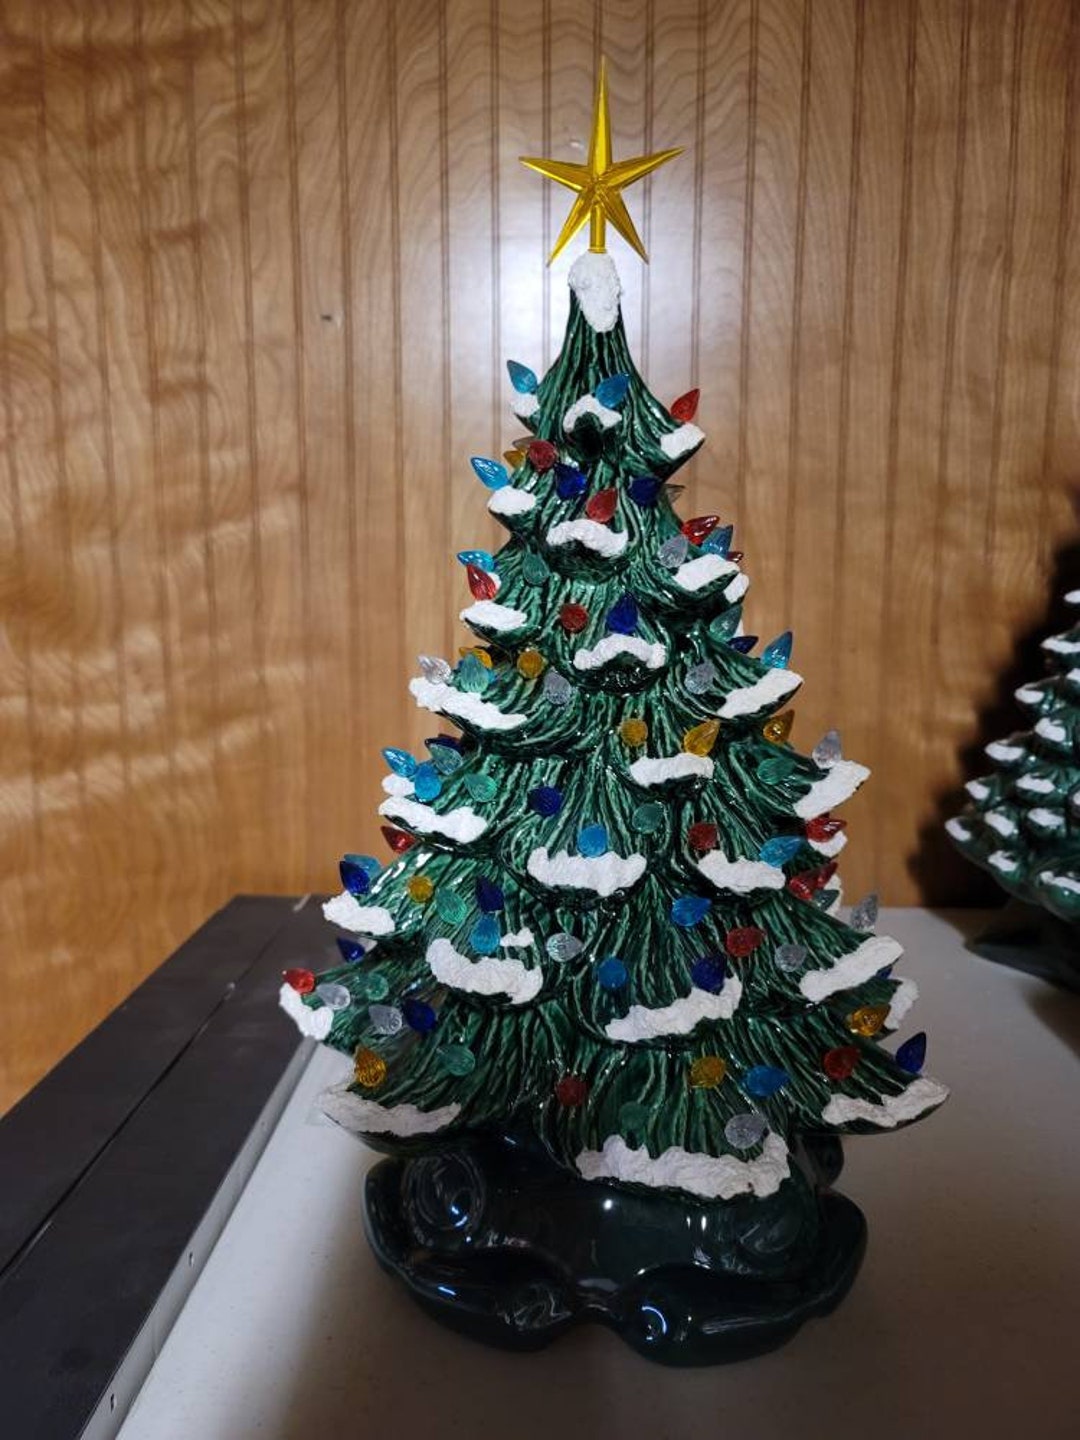 Ceramic Christmas Tree Approximately 19 Inches Tall, Complete With ...